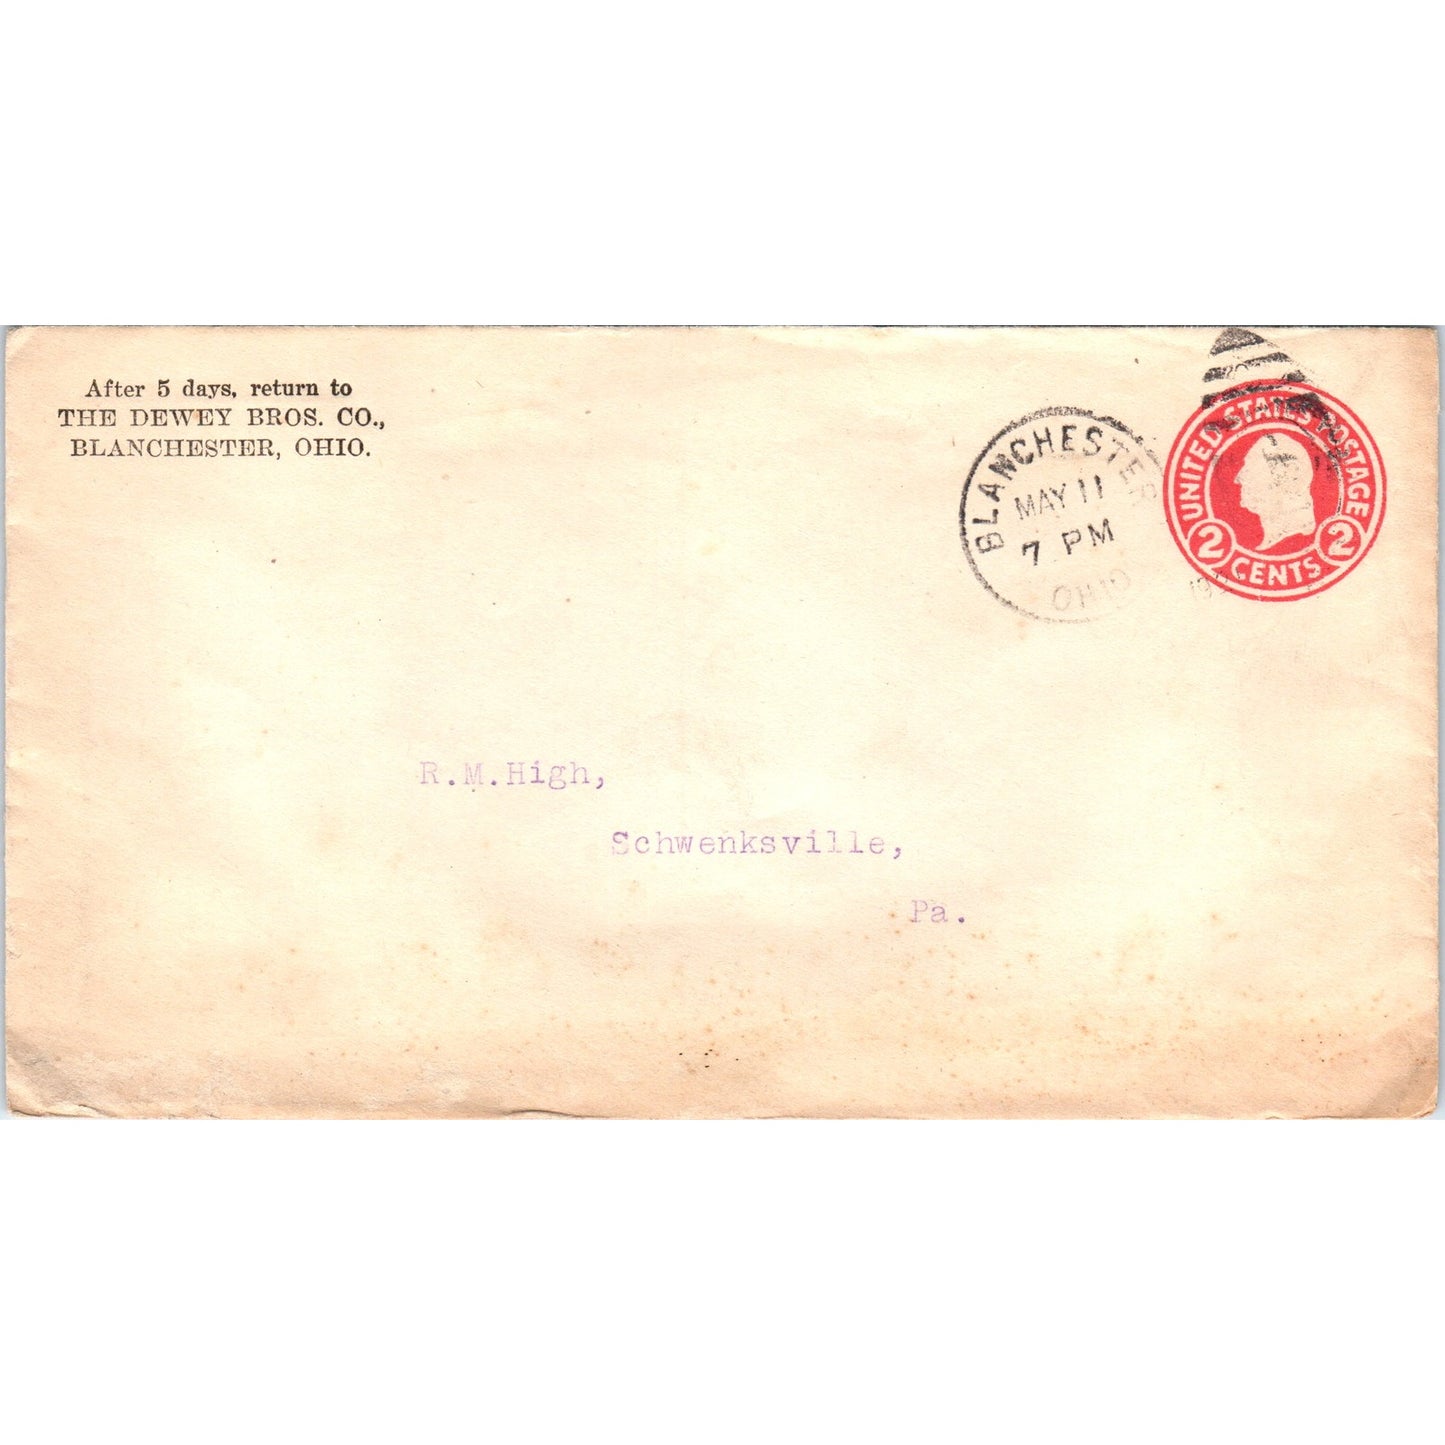 1921 The Dewey Bros Co Blanchester OH to Schwenksville Postal Cover TG7-PC3